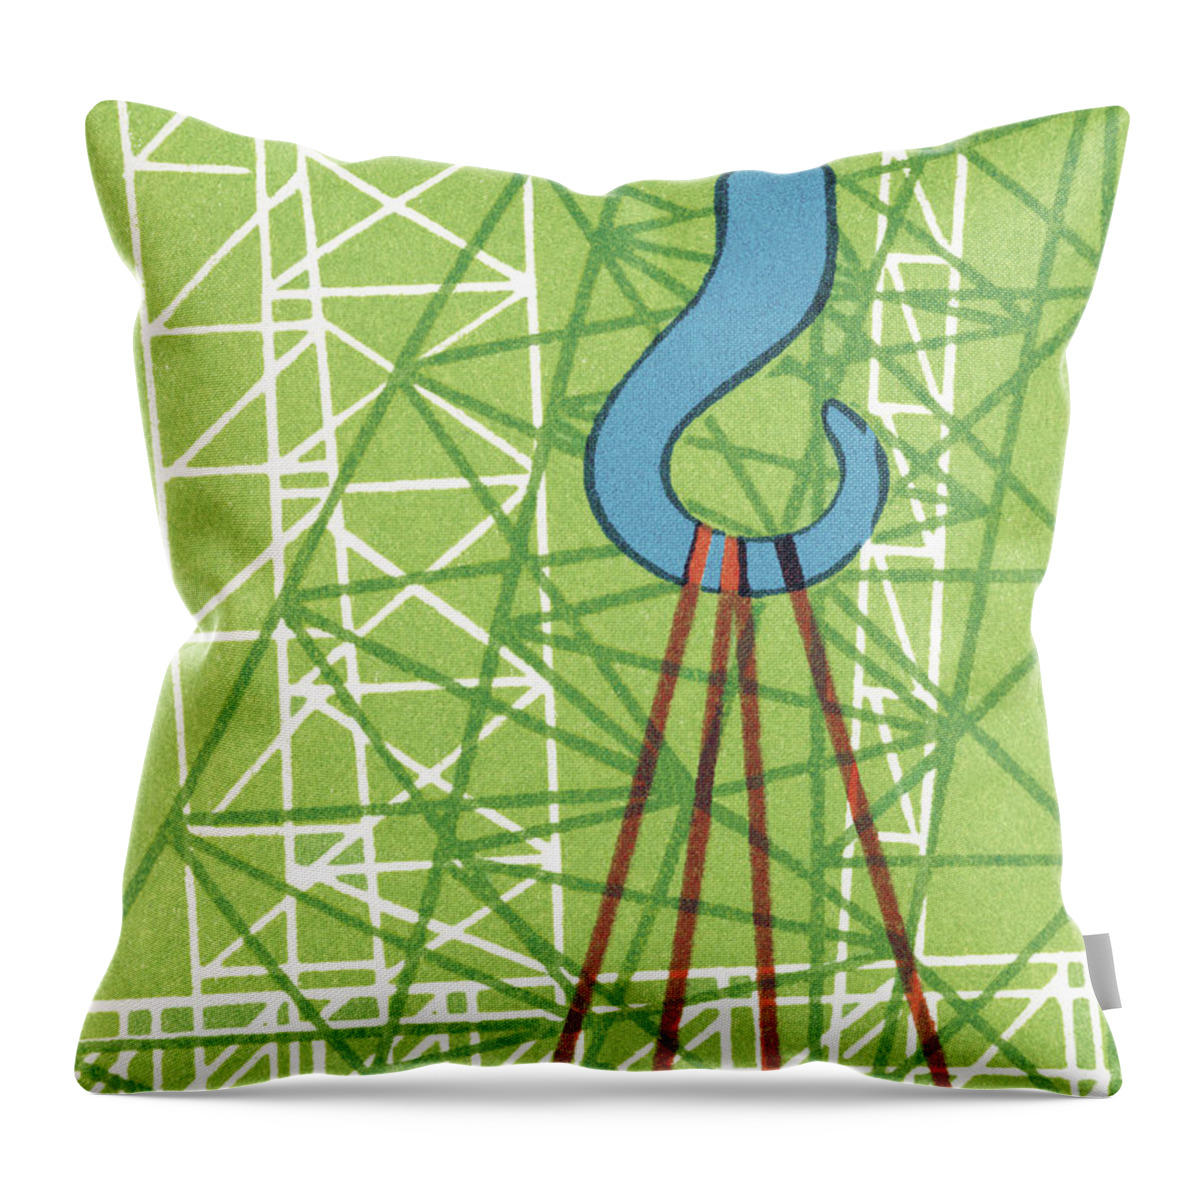 Build Throw Pillow featuring the drawing Crane Lifting Construction Materials by CSA Images